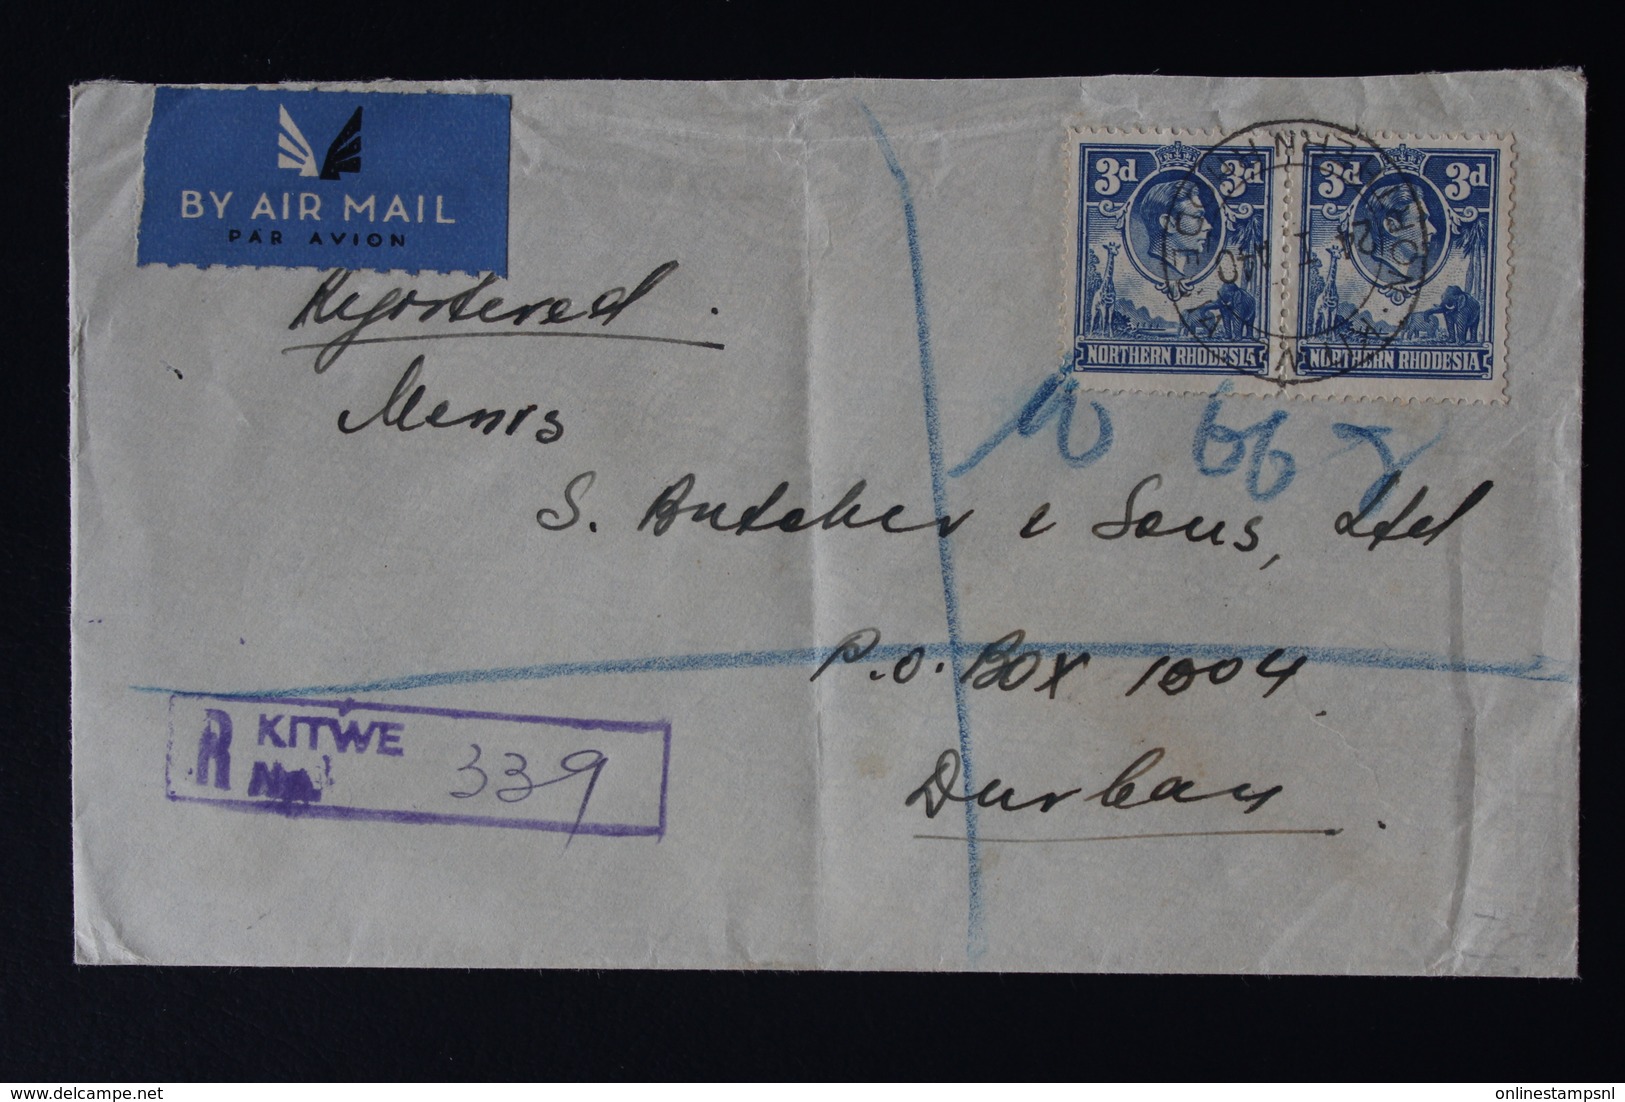 NORTHERN RHODESIA REGISTERED COVER KITWE -> DURBAN 21-1-1940 SG 34 * 2 BACK: DUPLICATE DURBAN - Northern Rhodesia (...-1963)